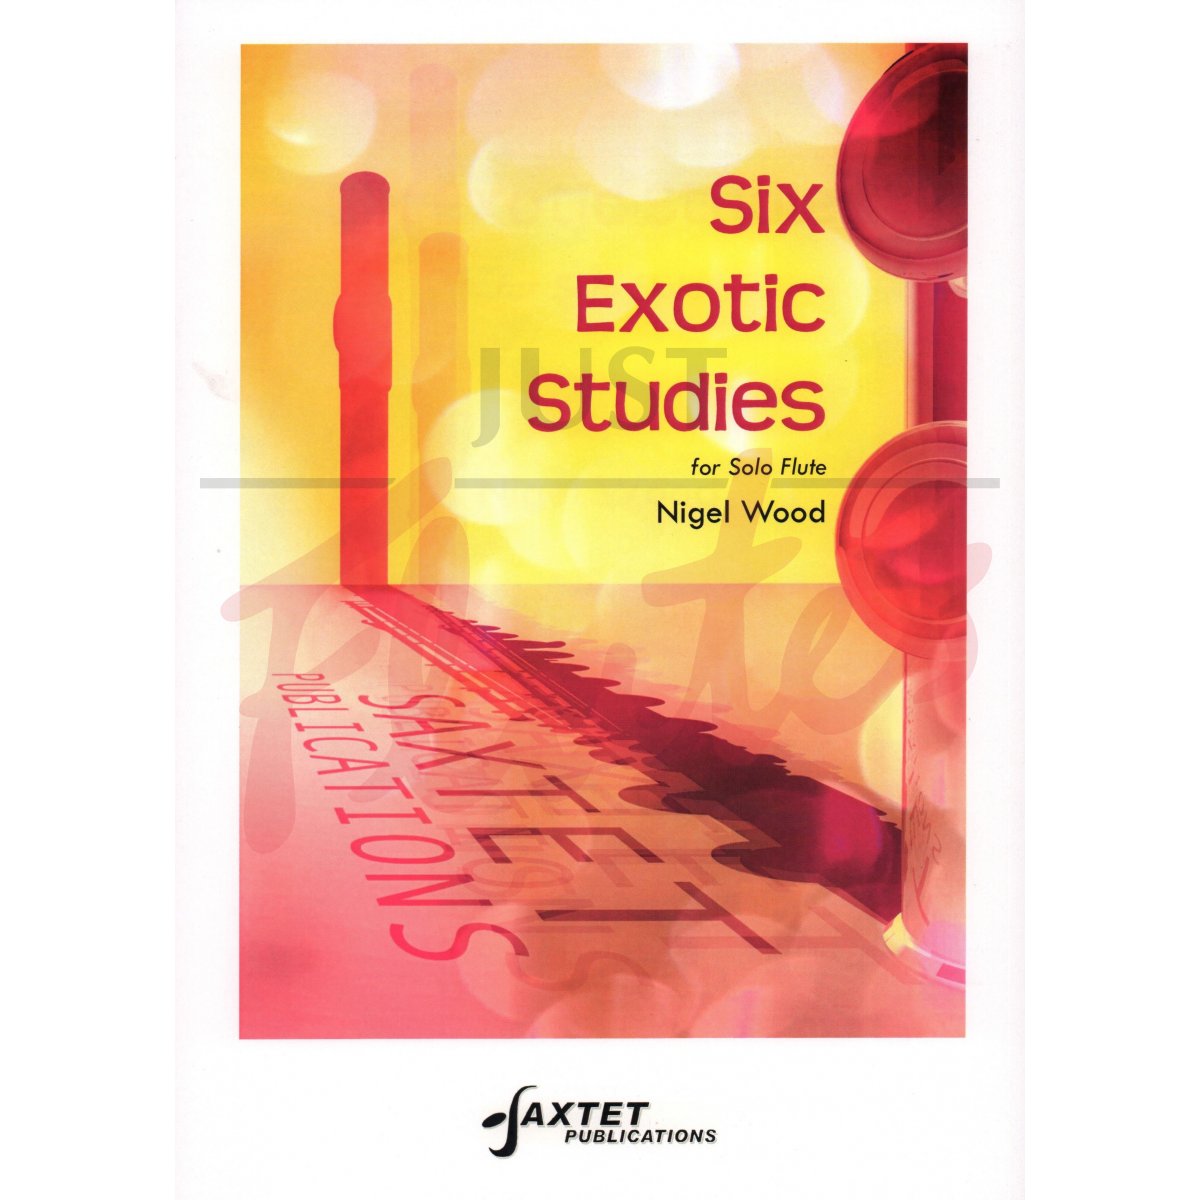 Six Exotic Studies for Solo Flute